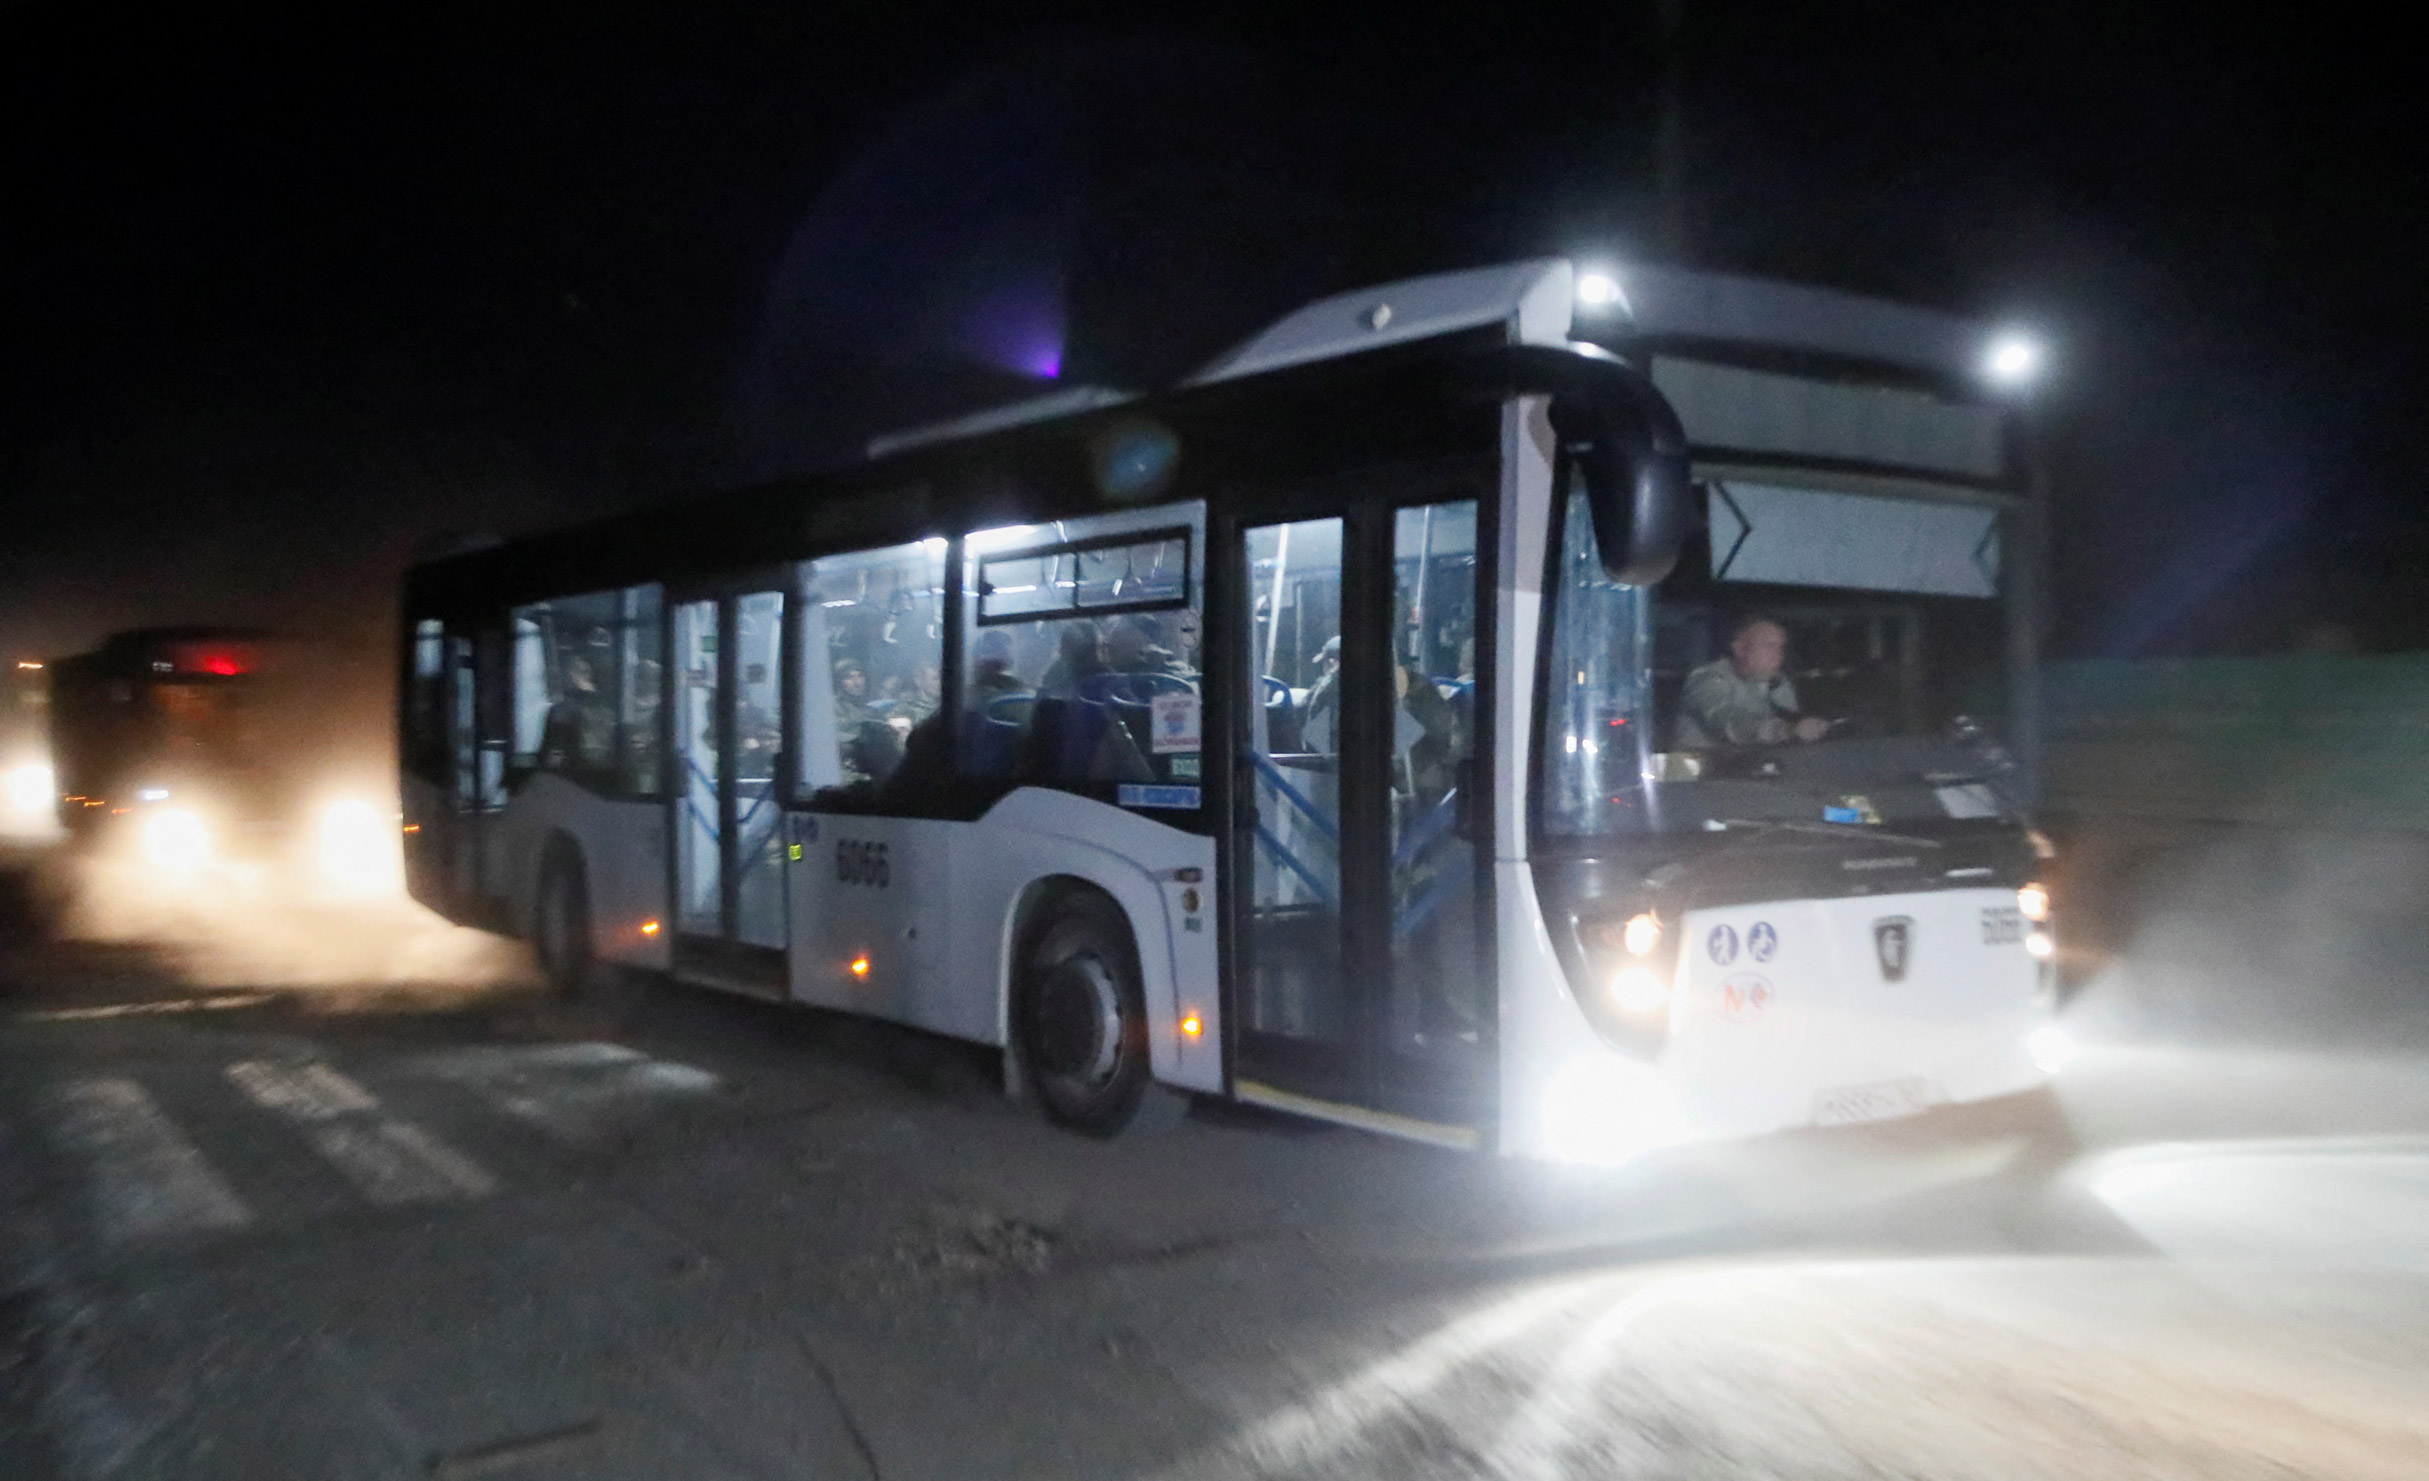 Buses carrying Ukrainian service members from the  Azovstal steel mill drive away under escort of the pro-Russian military in Mariupol, on Monday.